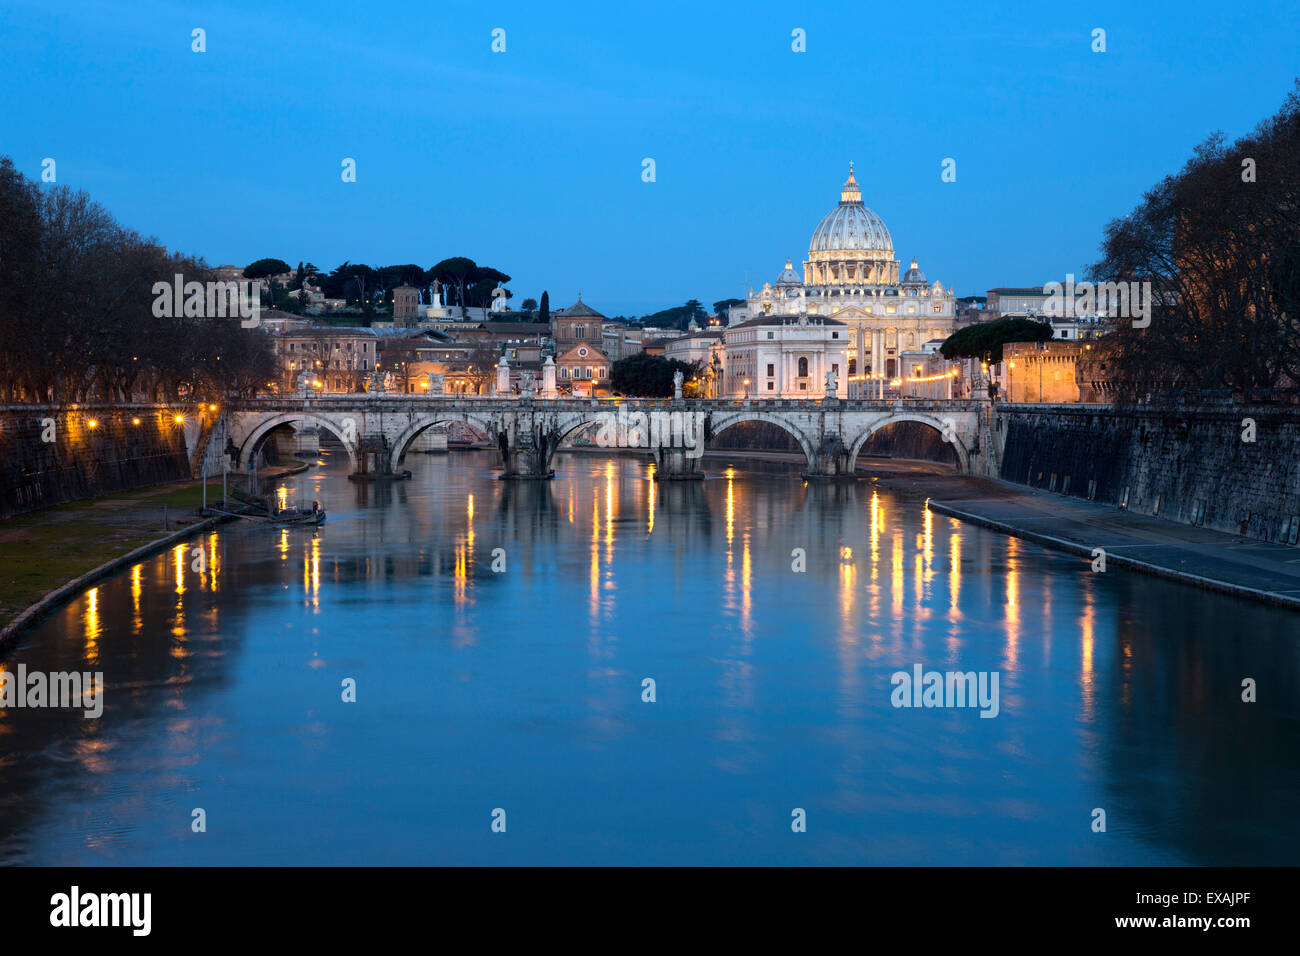 St. Peter's Basilica, the River Tiber and Ponte Sant'Angelo at night, Rome, Lazio, Italy, Europe Stock Photo